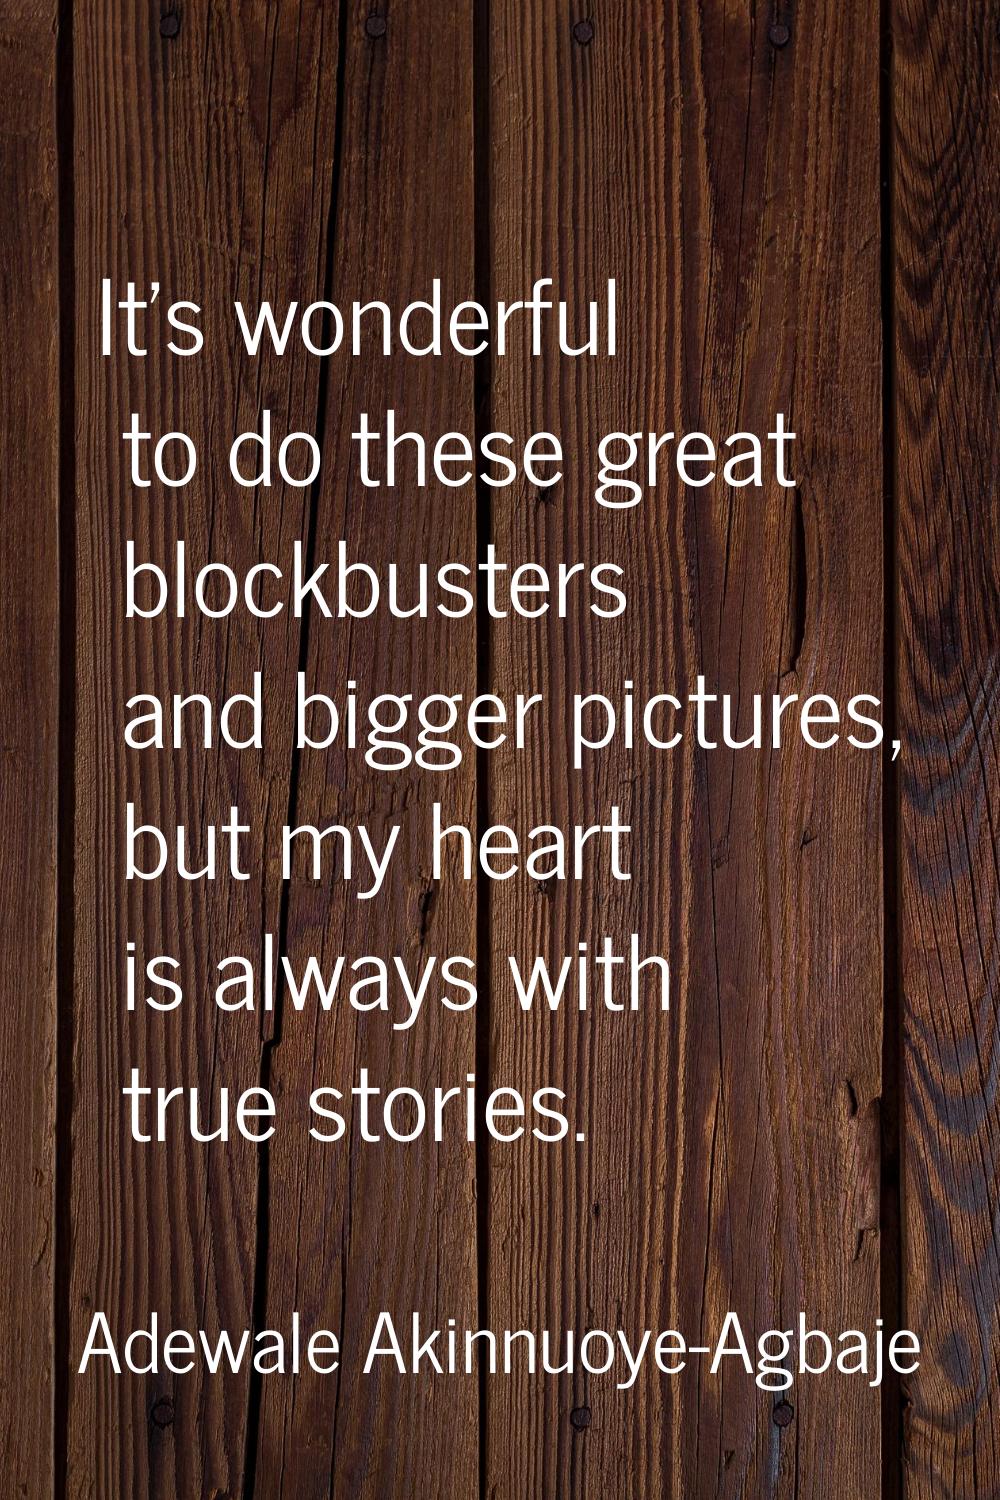 It's wonderful to do these great blockbusters and bigger pictures, but my heart is always with true